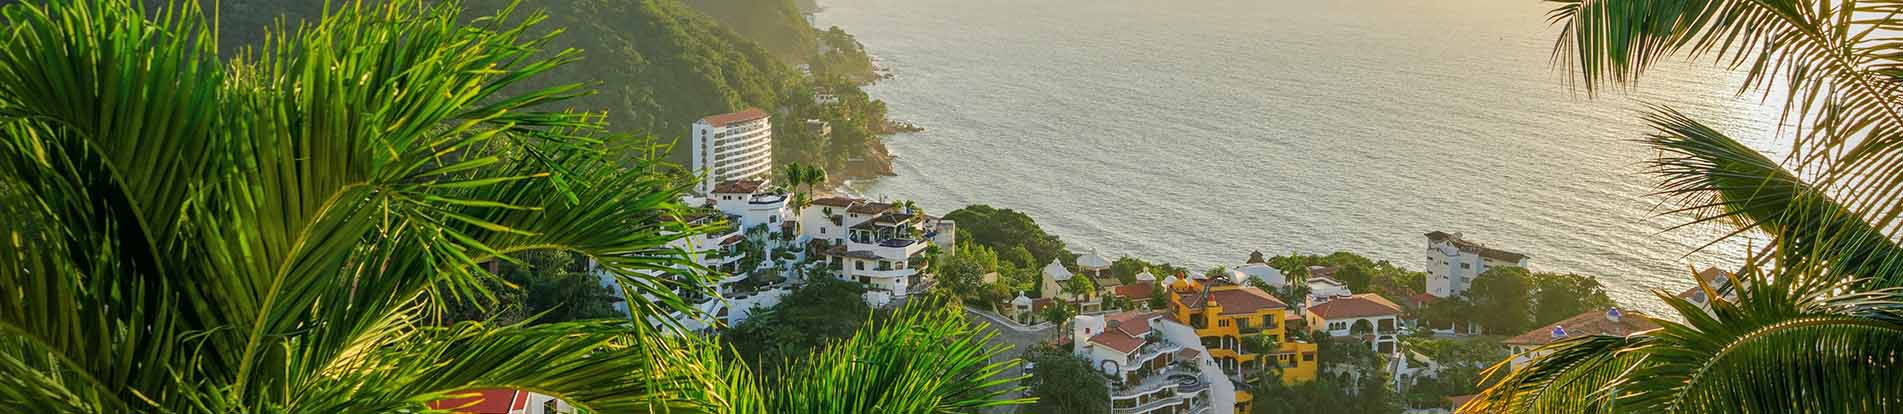 How Can You Make Your Puerto Vallarta Trip Exciting?